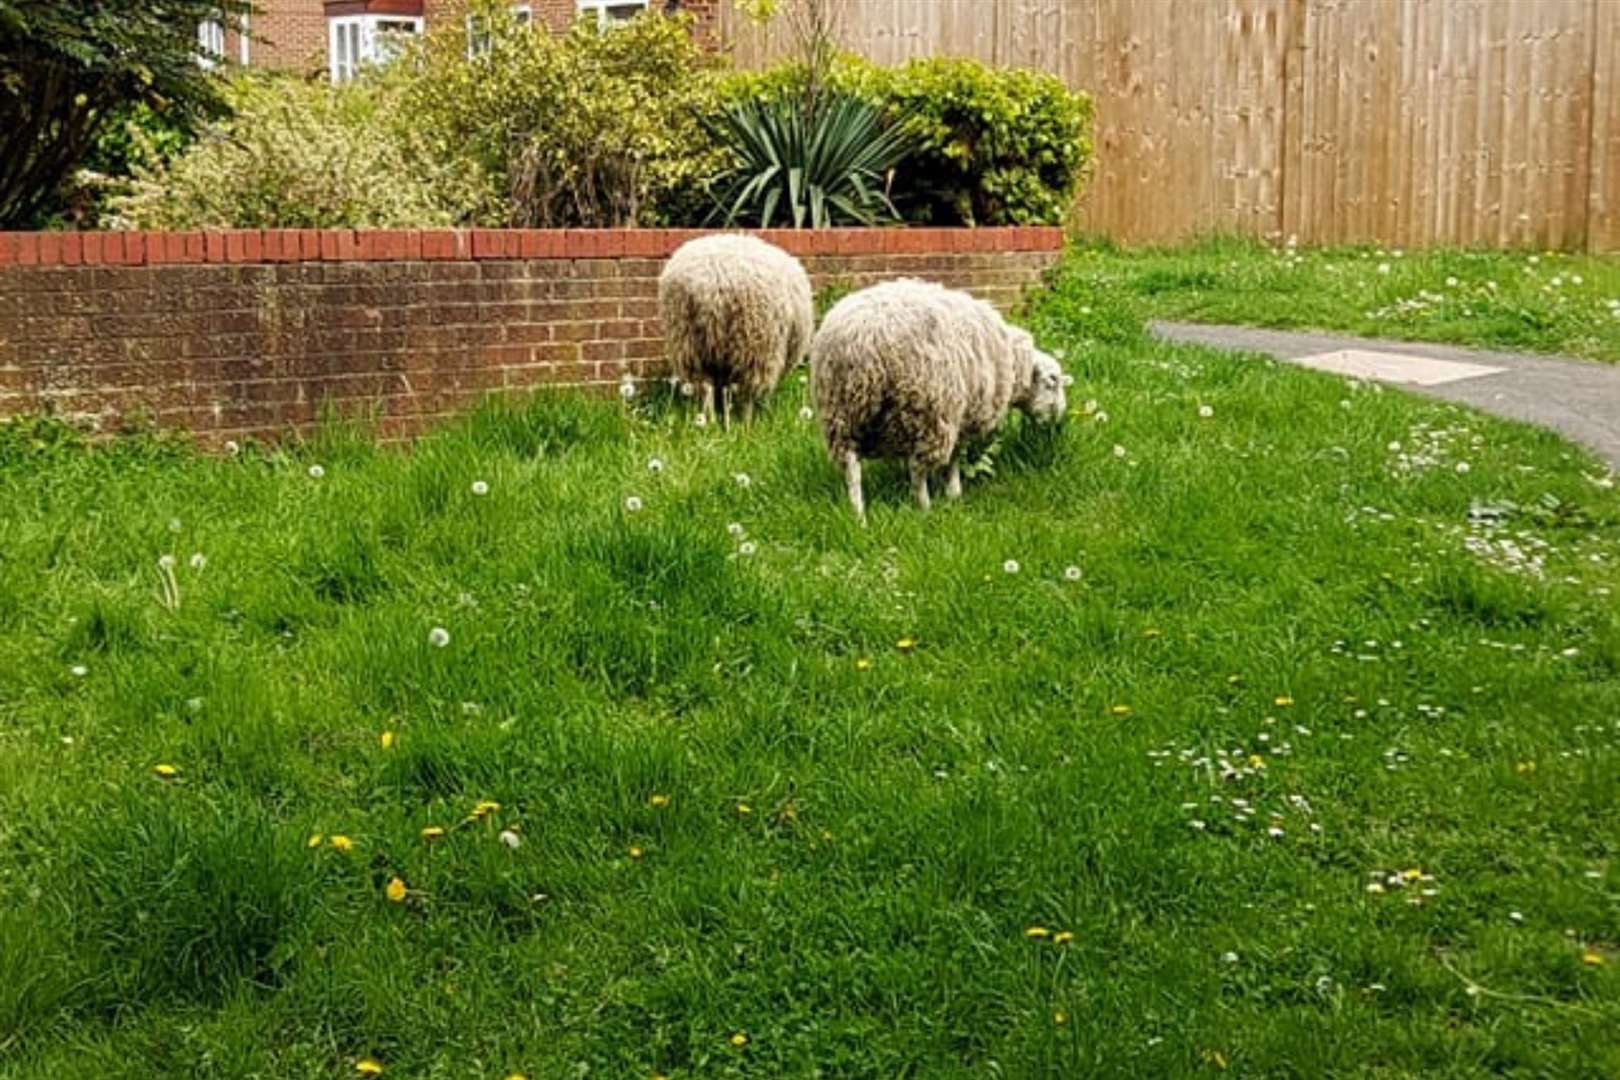 The escaped sheep paused to nibble at a grass verge in Willesborough